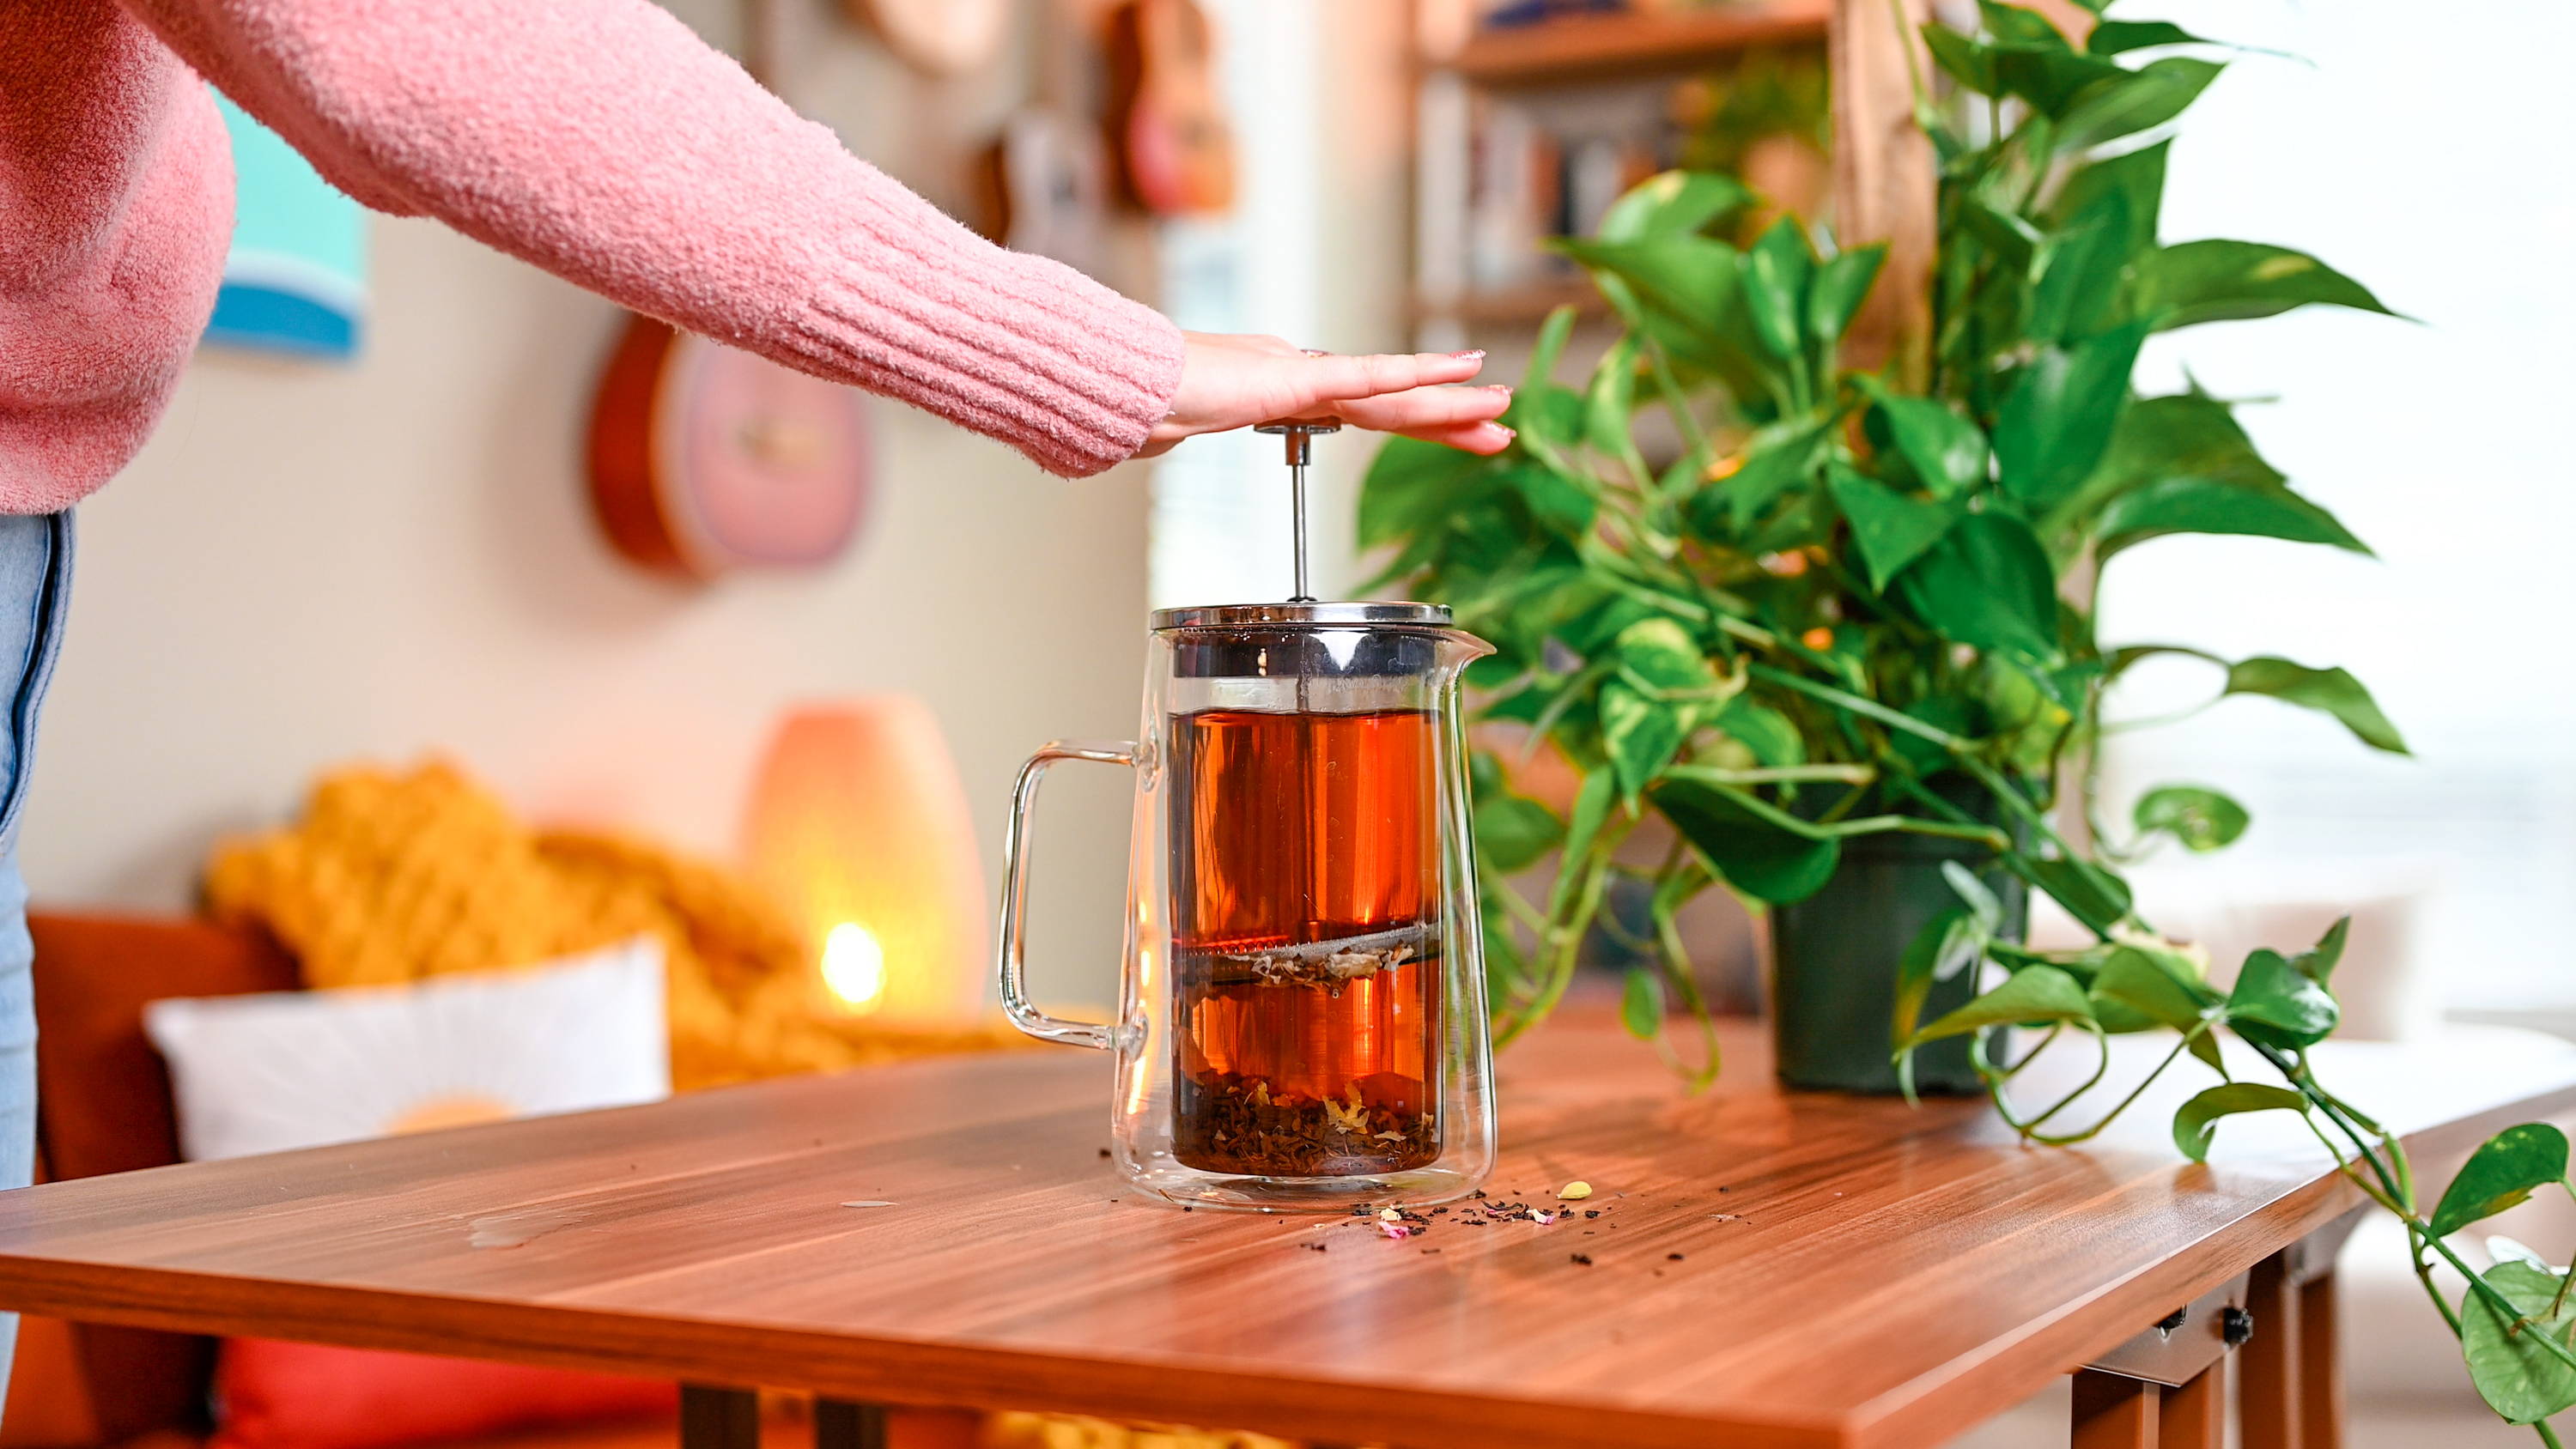 How to Use a French Press for Tea